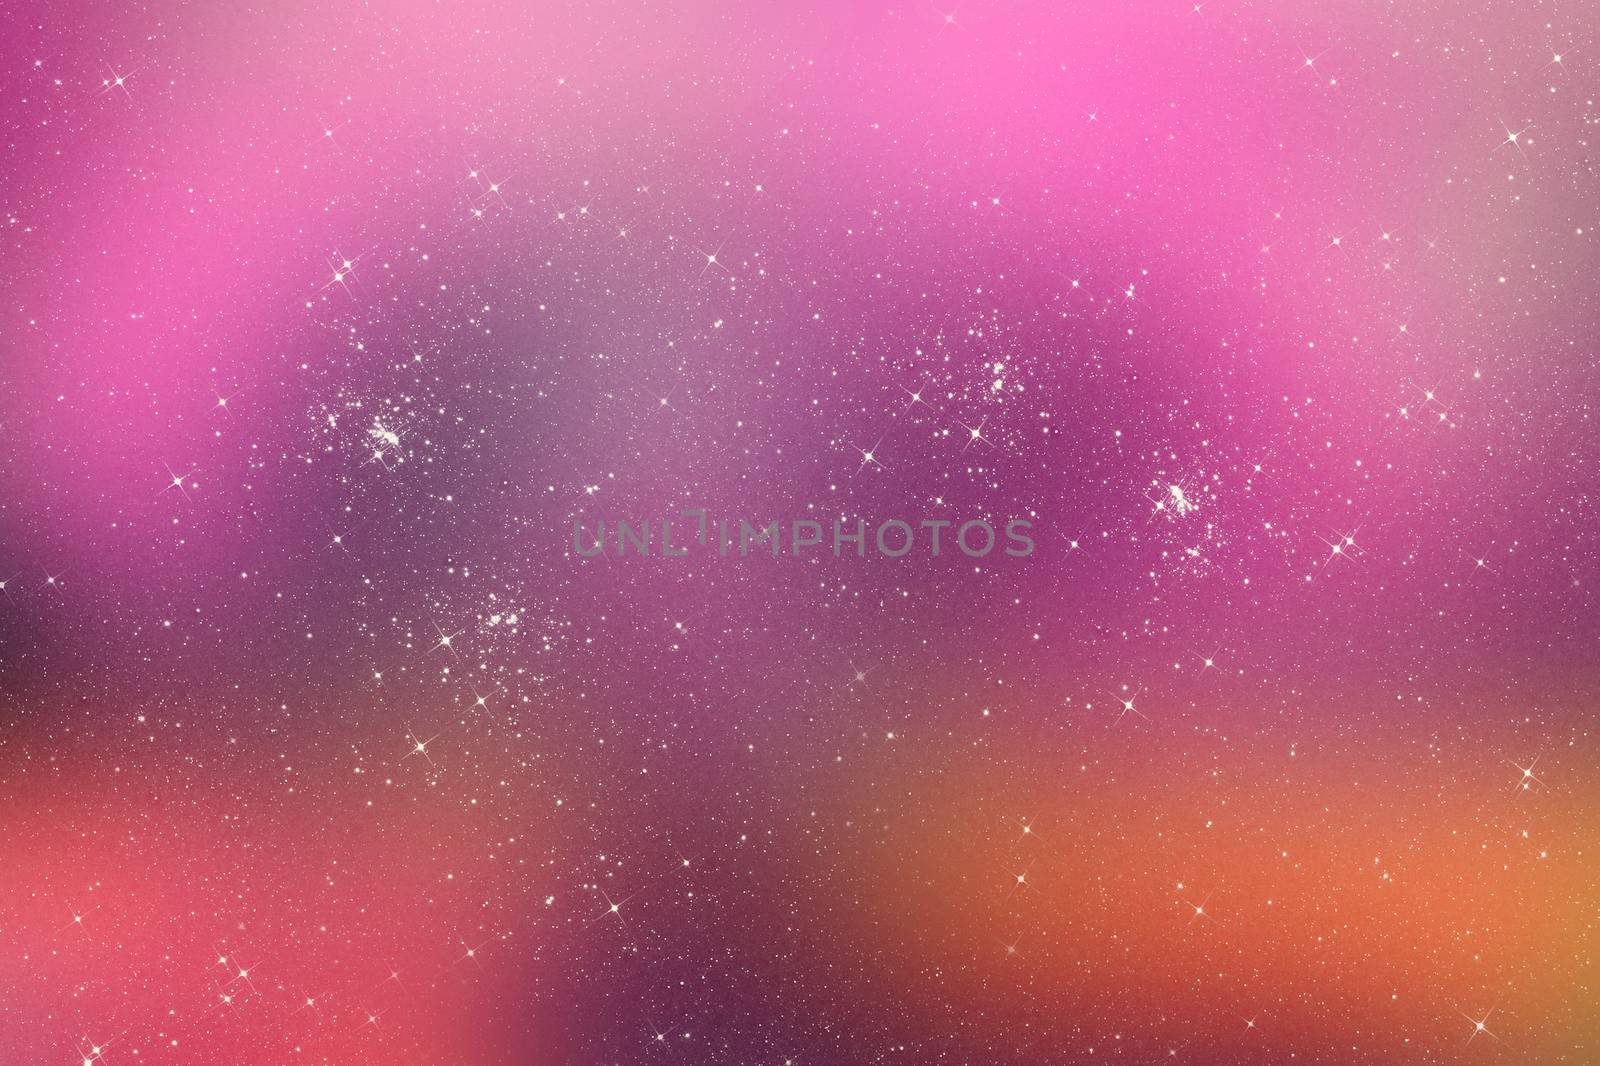 Starry pink universe background with bright stars by Sportactive